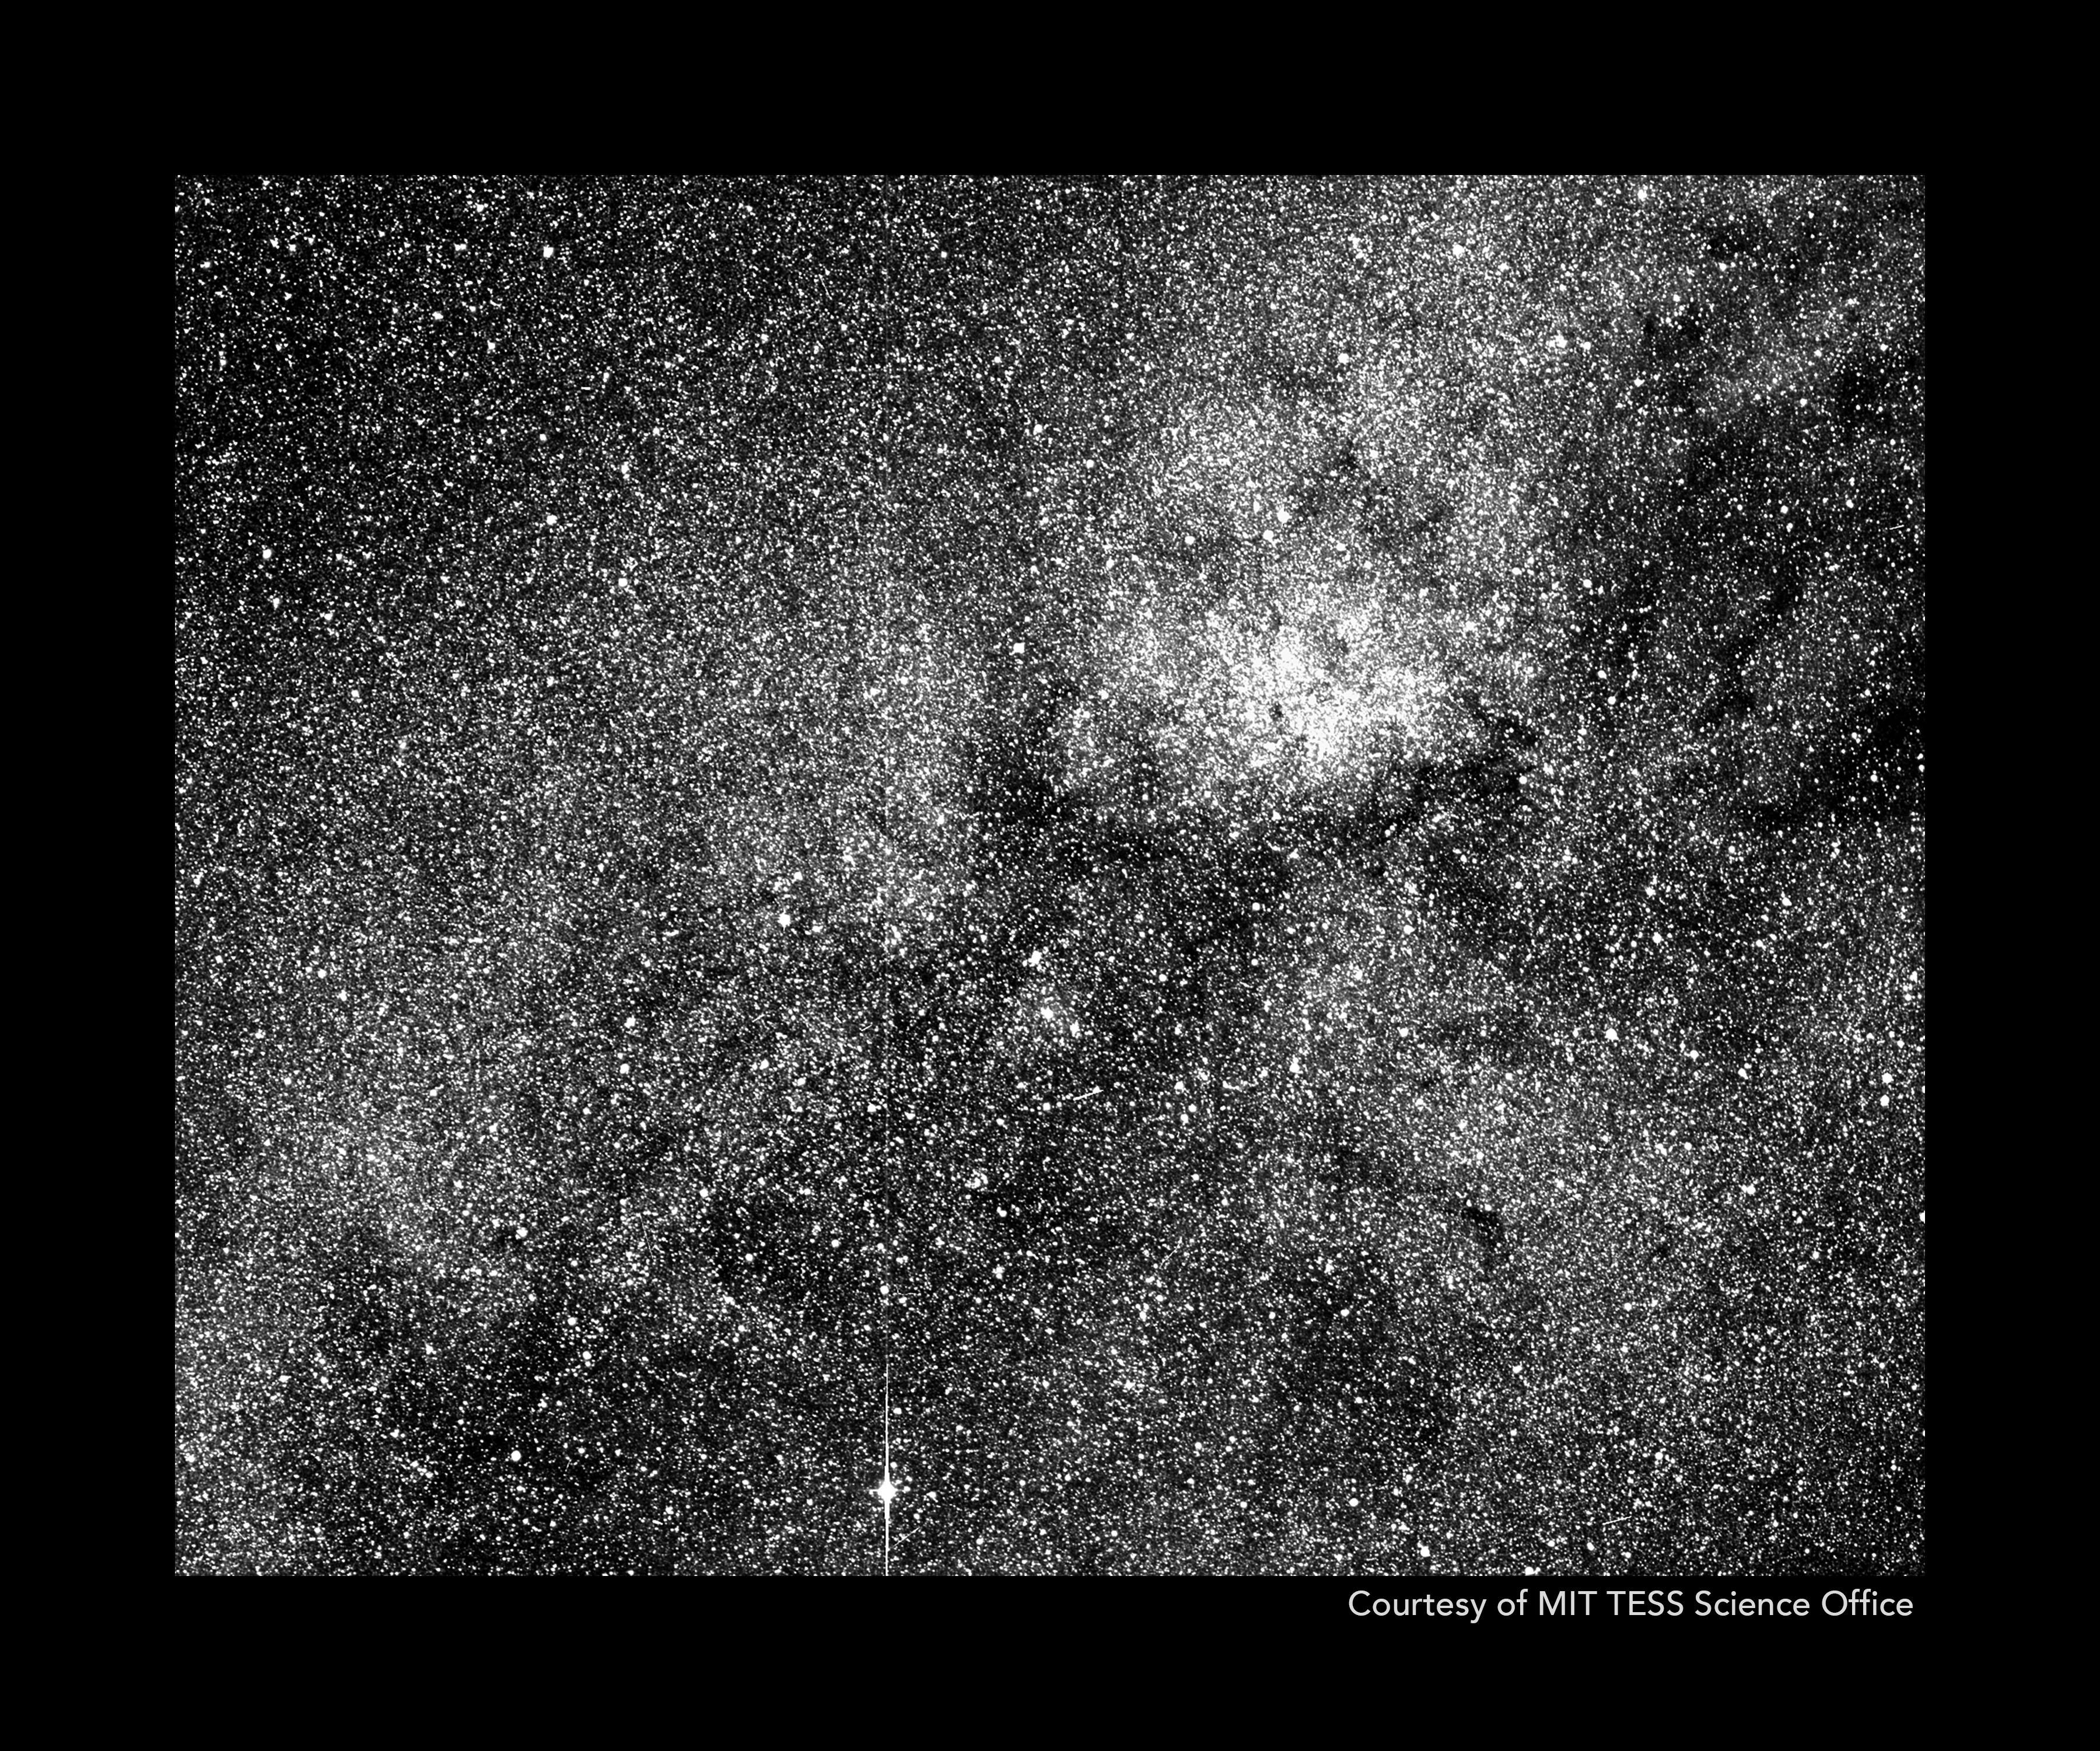 Black and white image packed with stars.